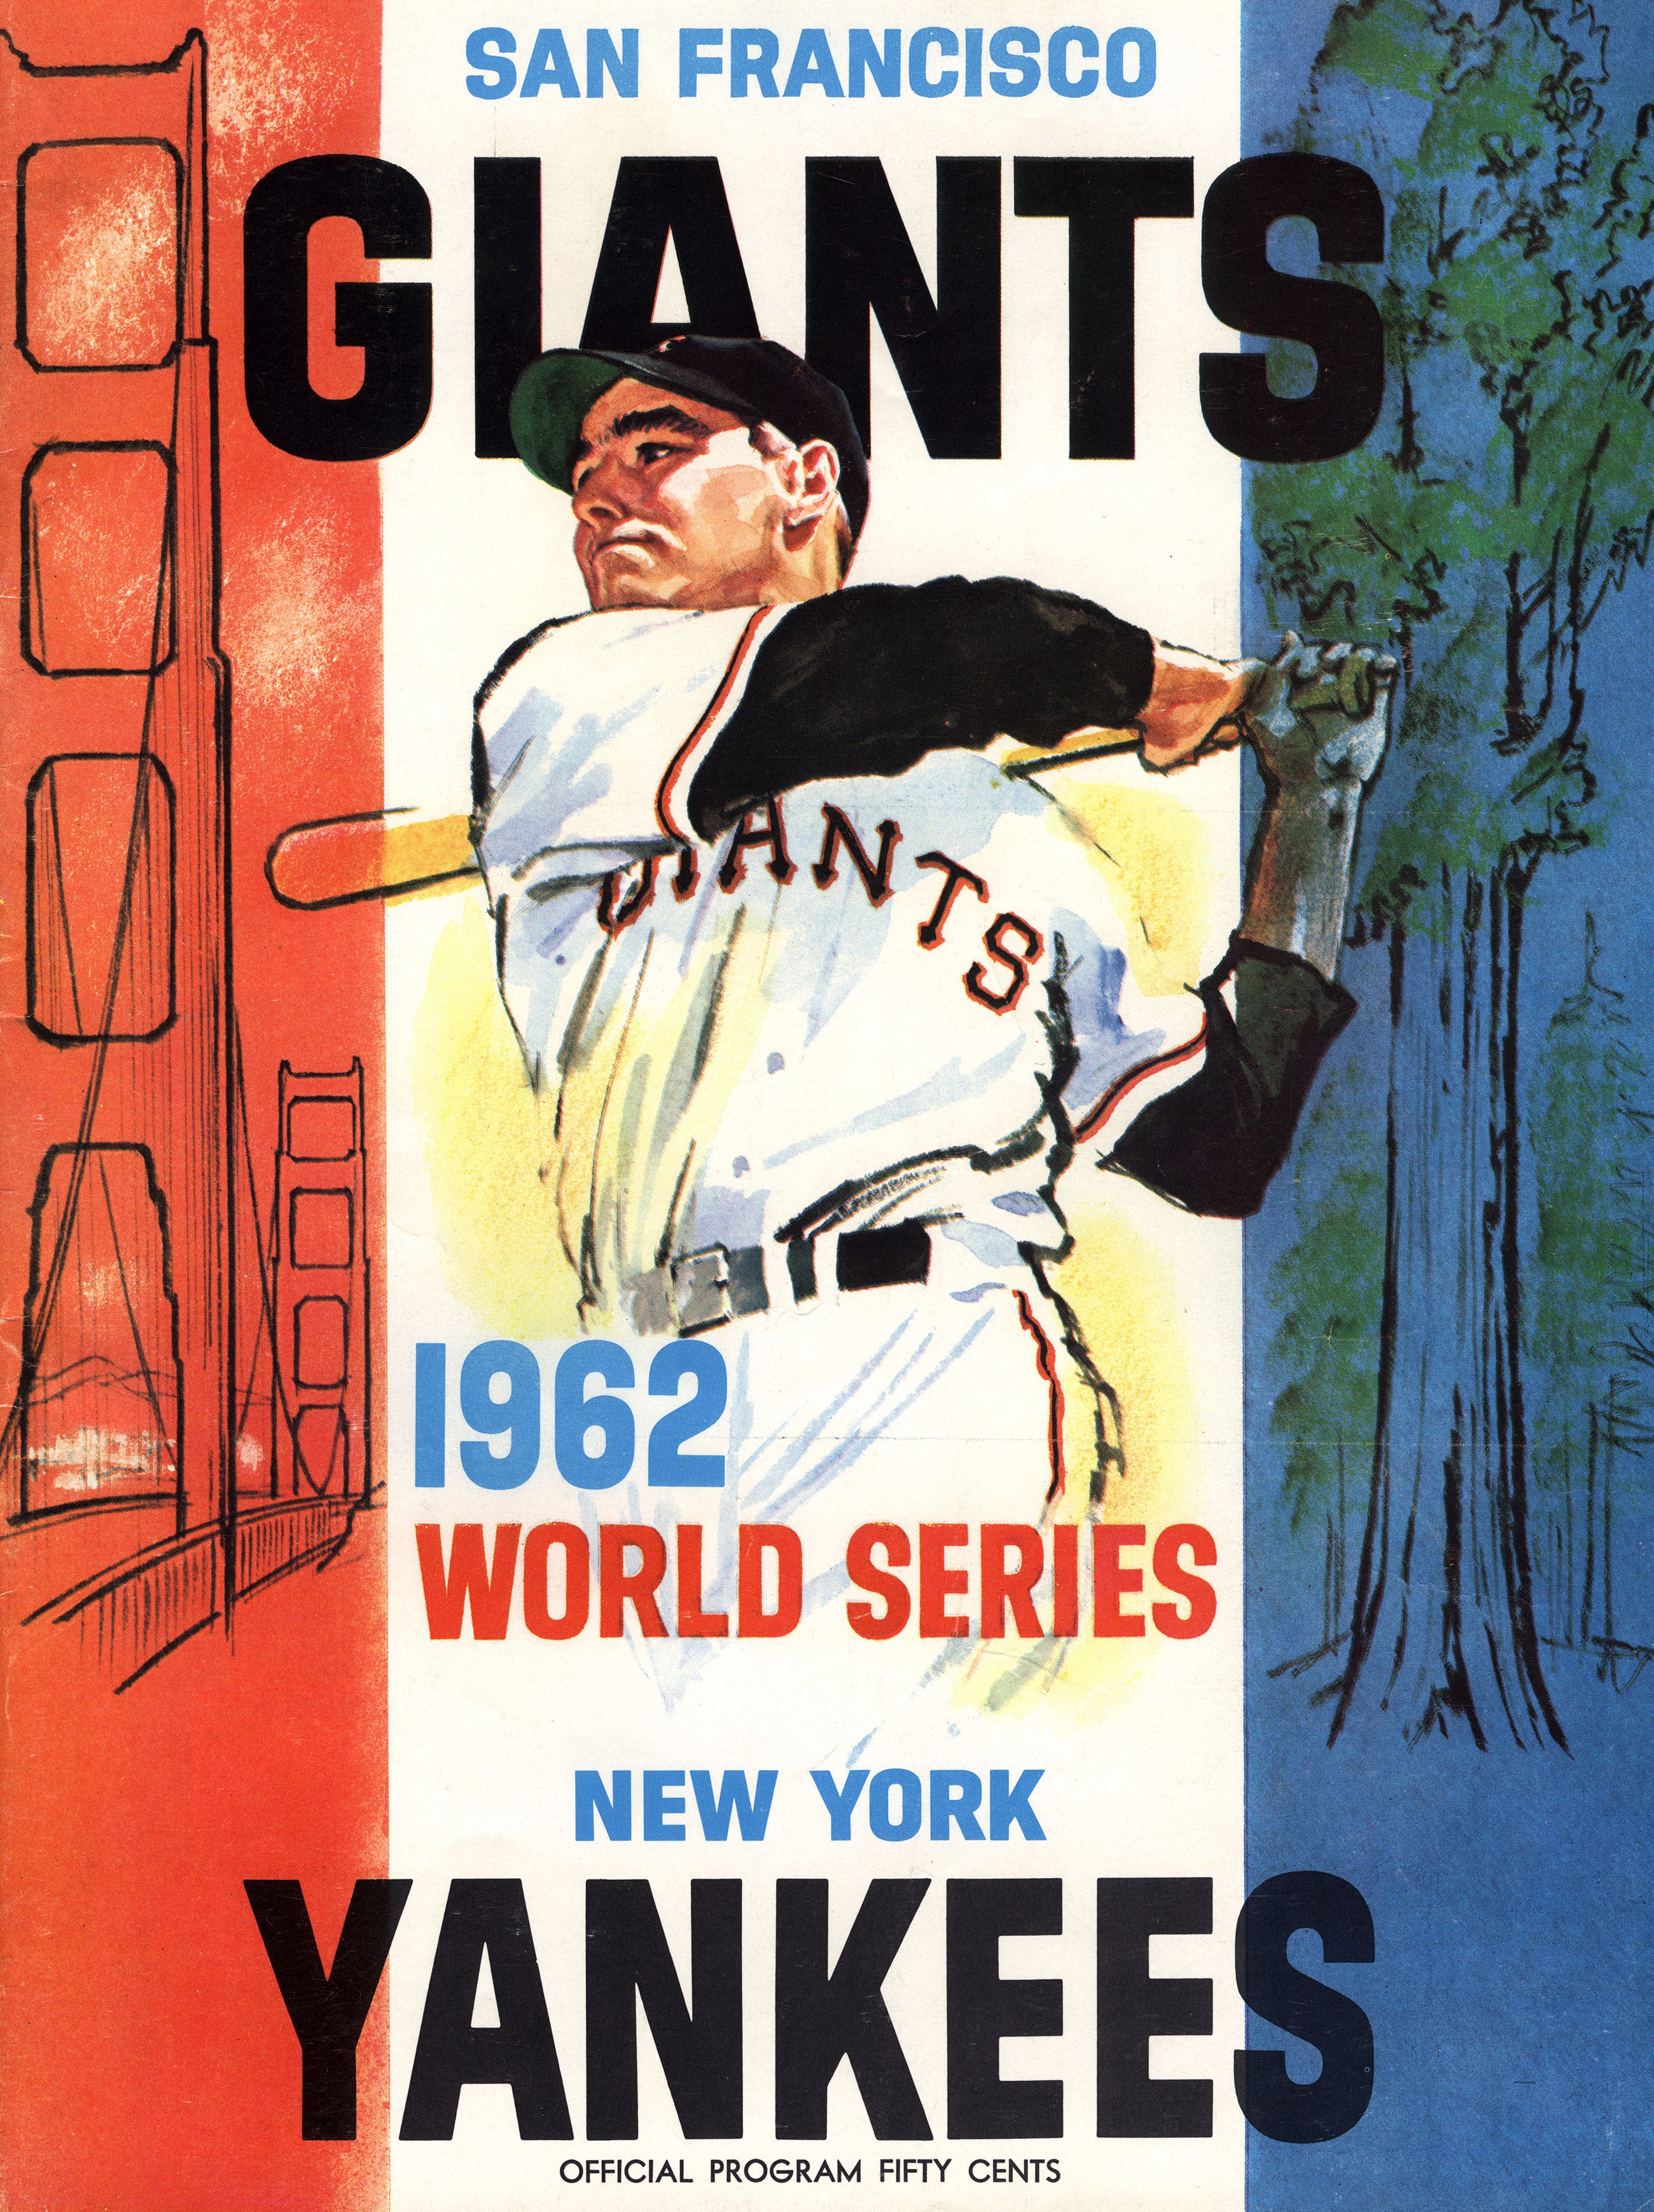 Yankees hold off Giants in Game 7 to win 1962 World Series